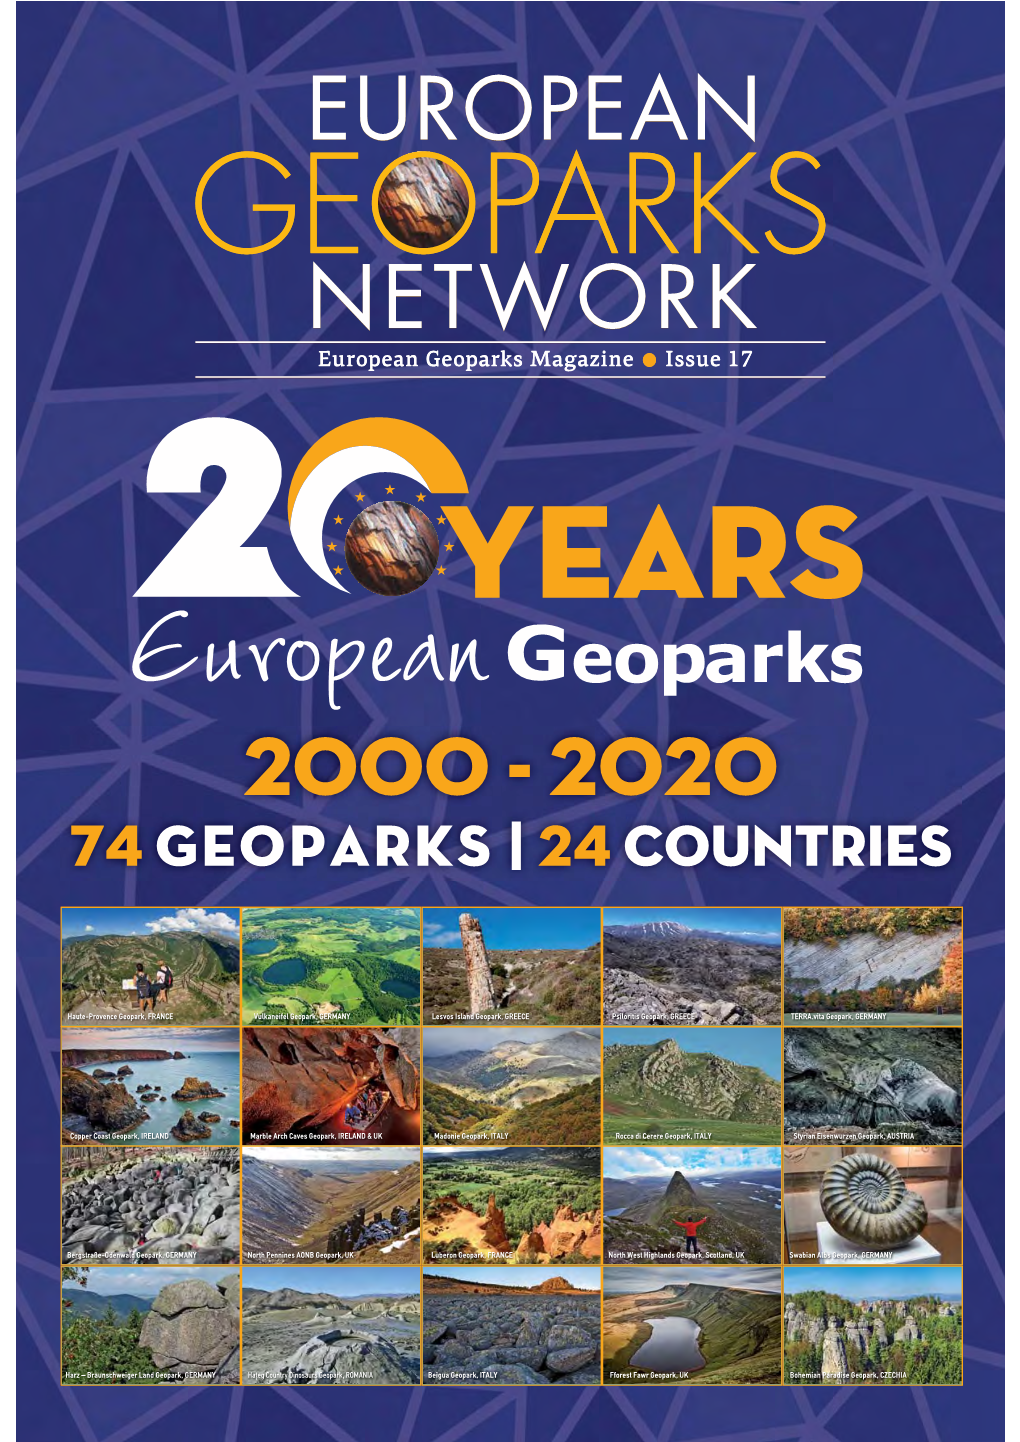 74 Geoparks | 24 Countries